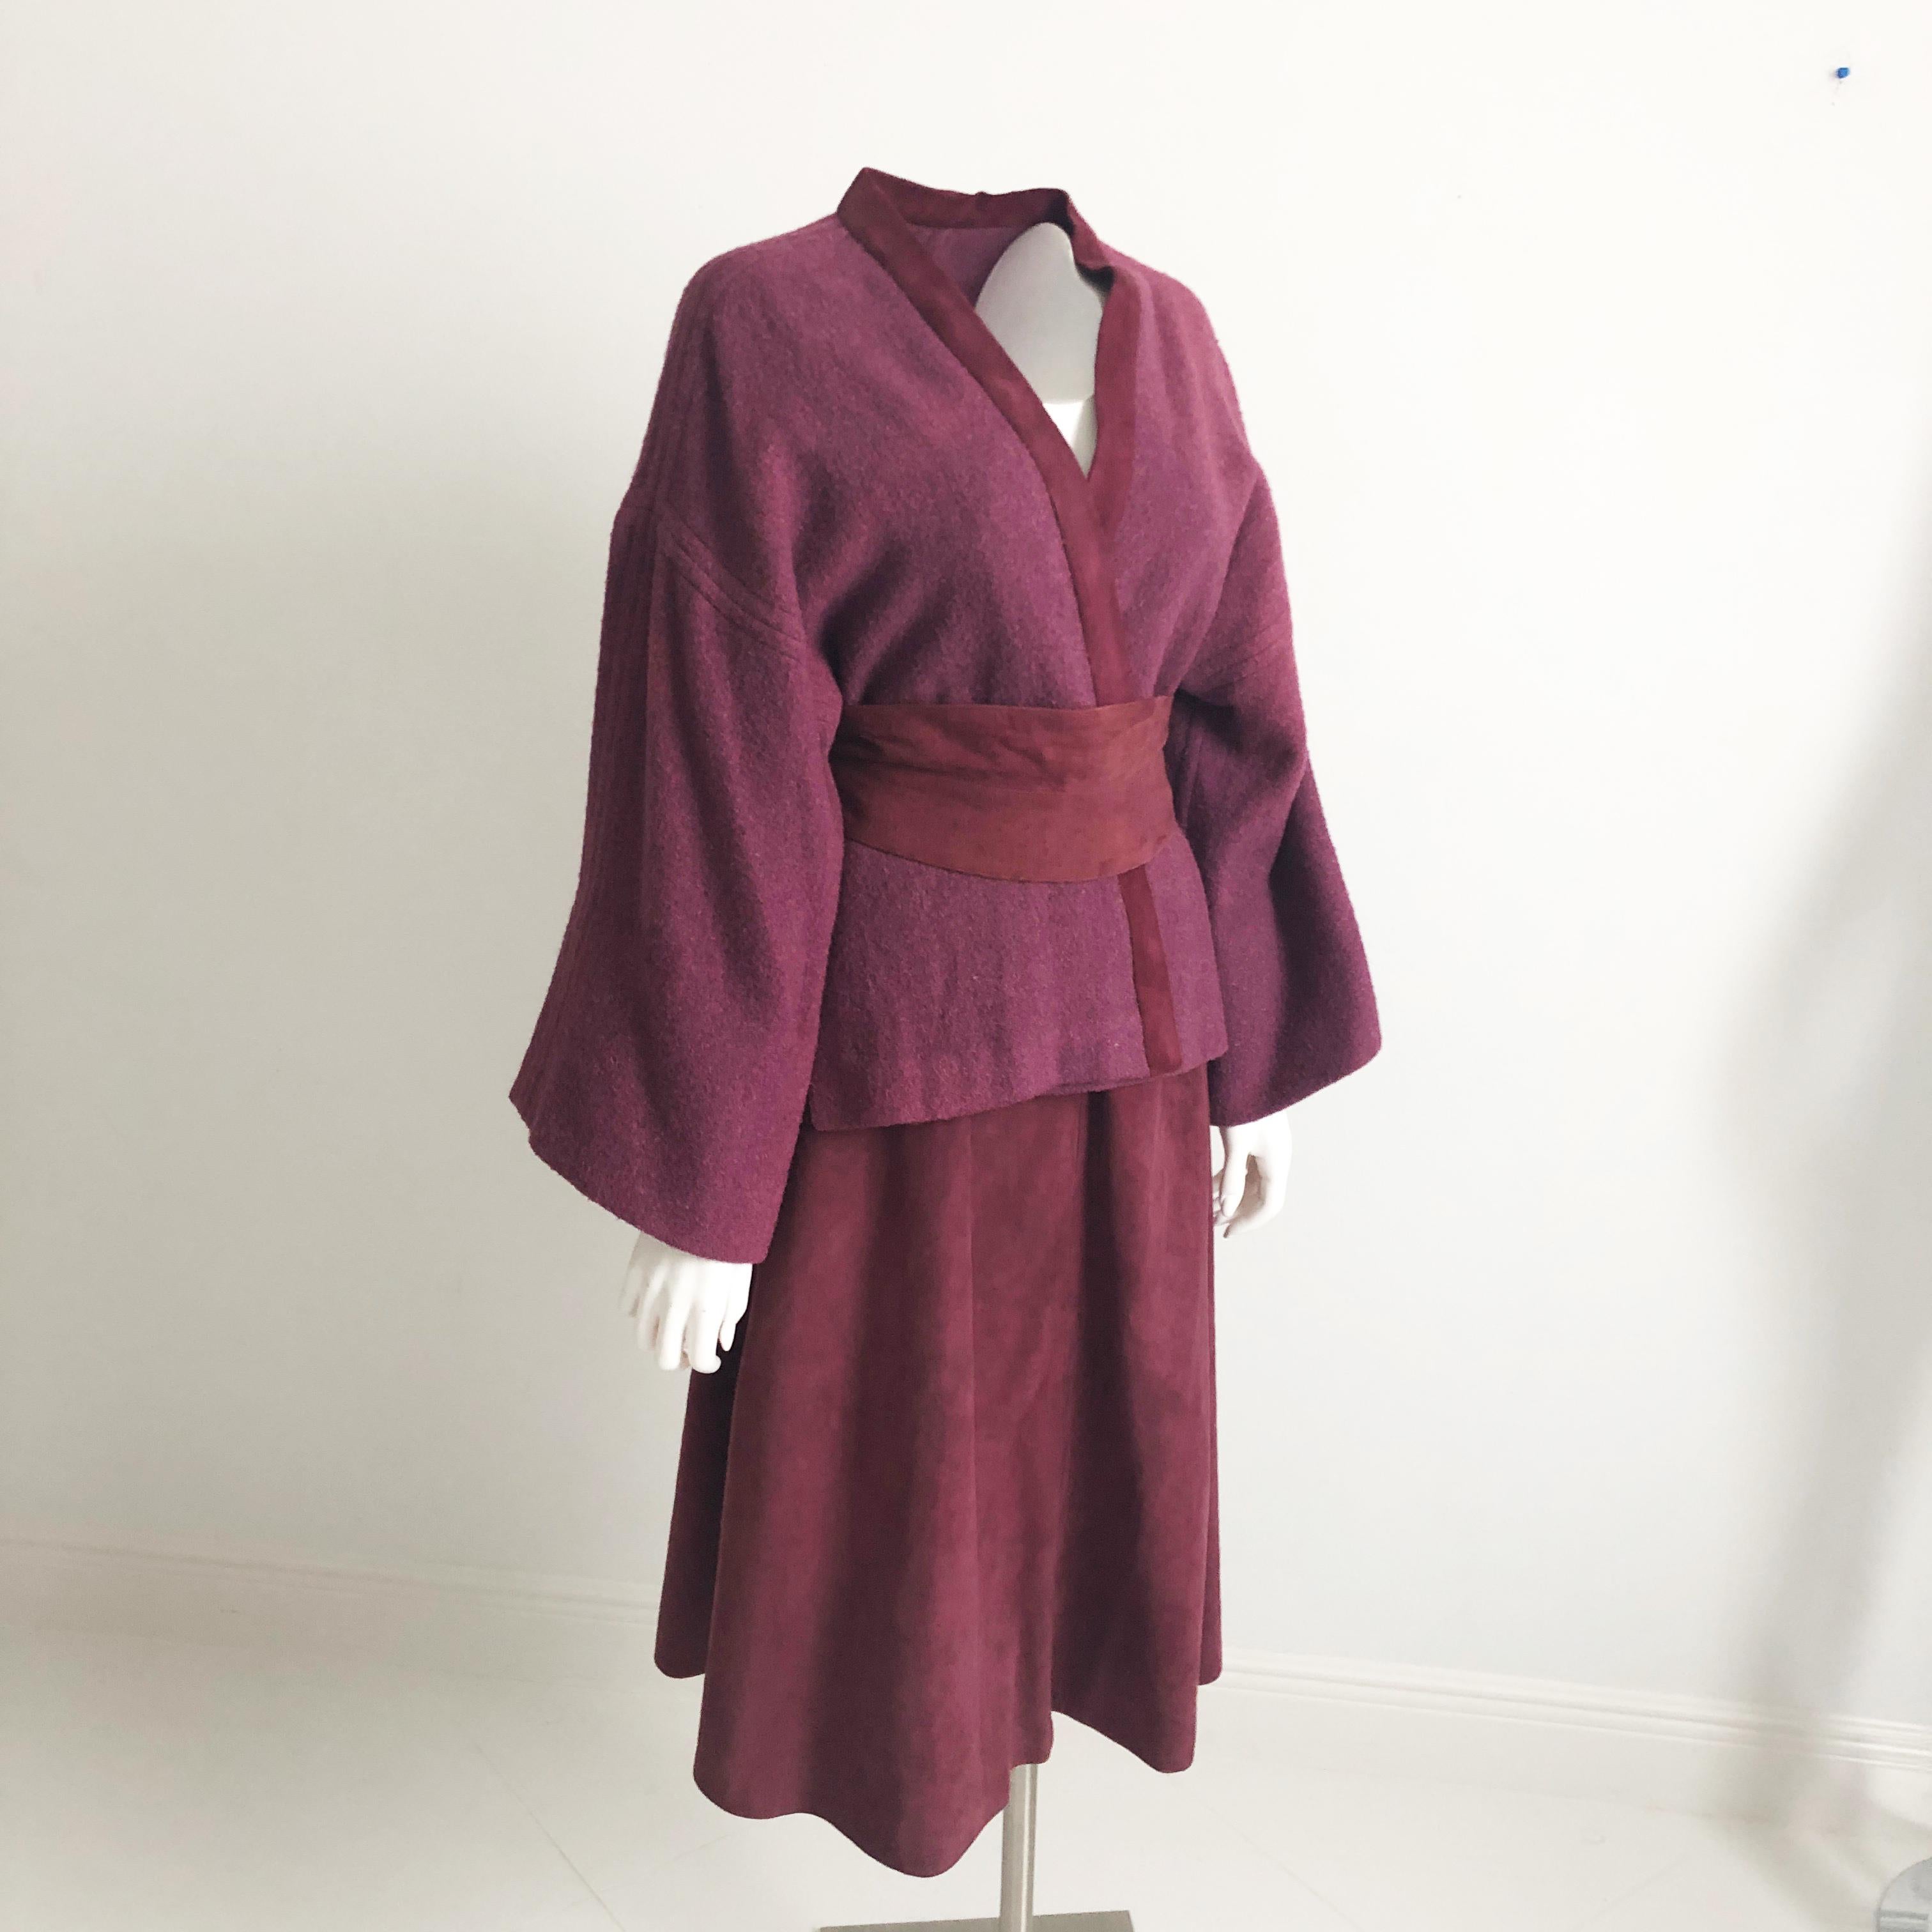 Bonnie Cashin was inspired by her travels and created pieces that were both stylish and practical.  This rare ensemble is wonderful example of her creative genius and features a wine-colored wool Kimono jacket trimmed in suede, a silk-lined suede